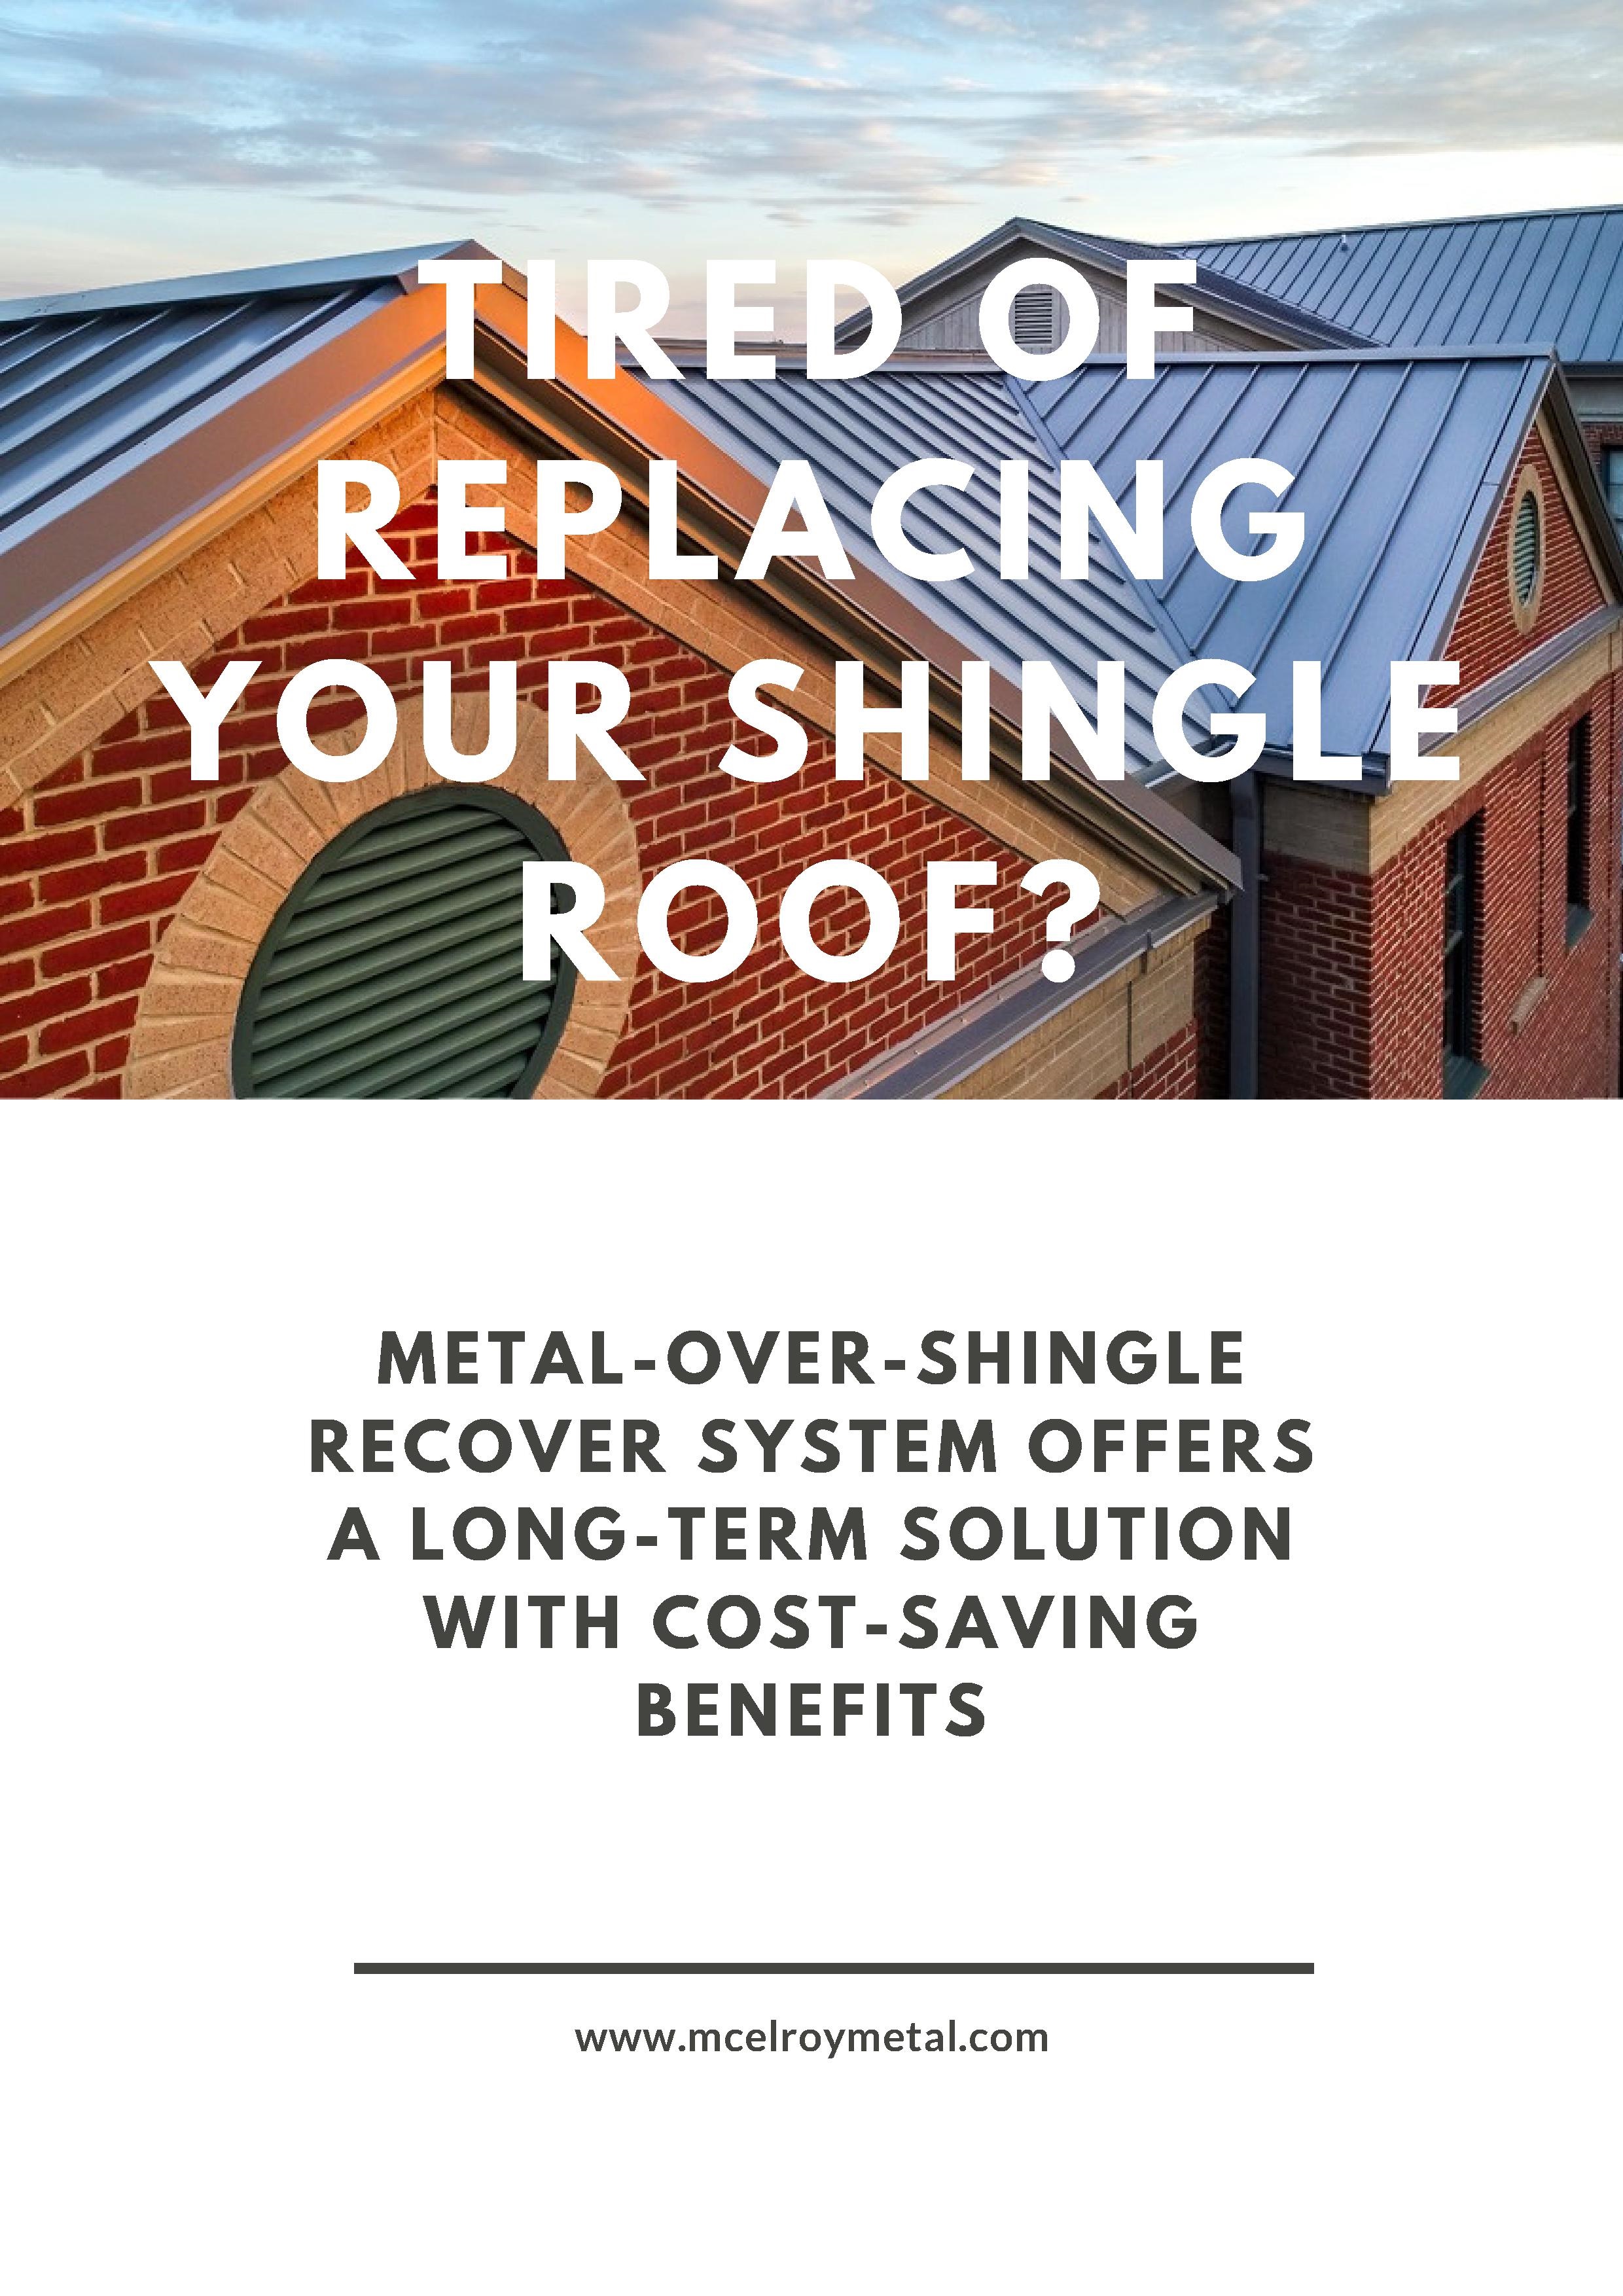 McElroy Metal introduces Ebook Tired of Replacing Your Shingle Roof?